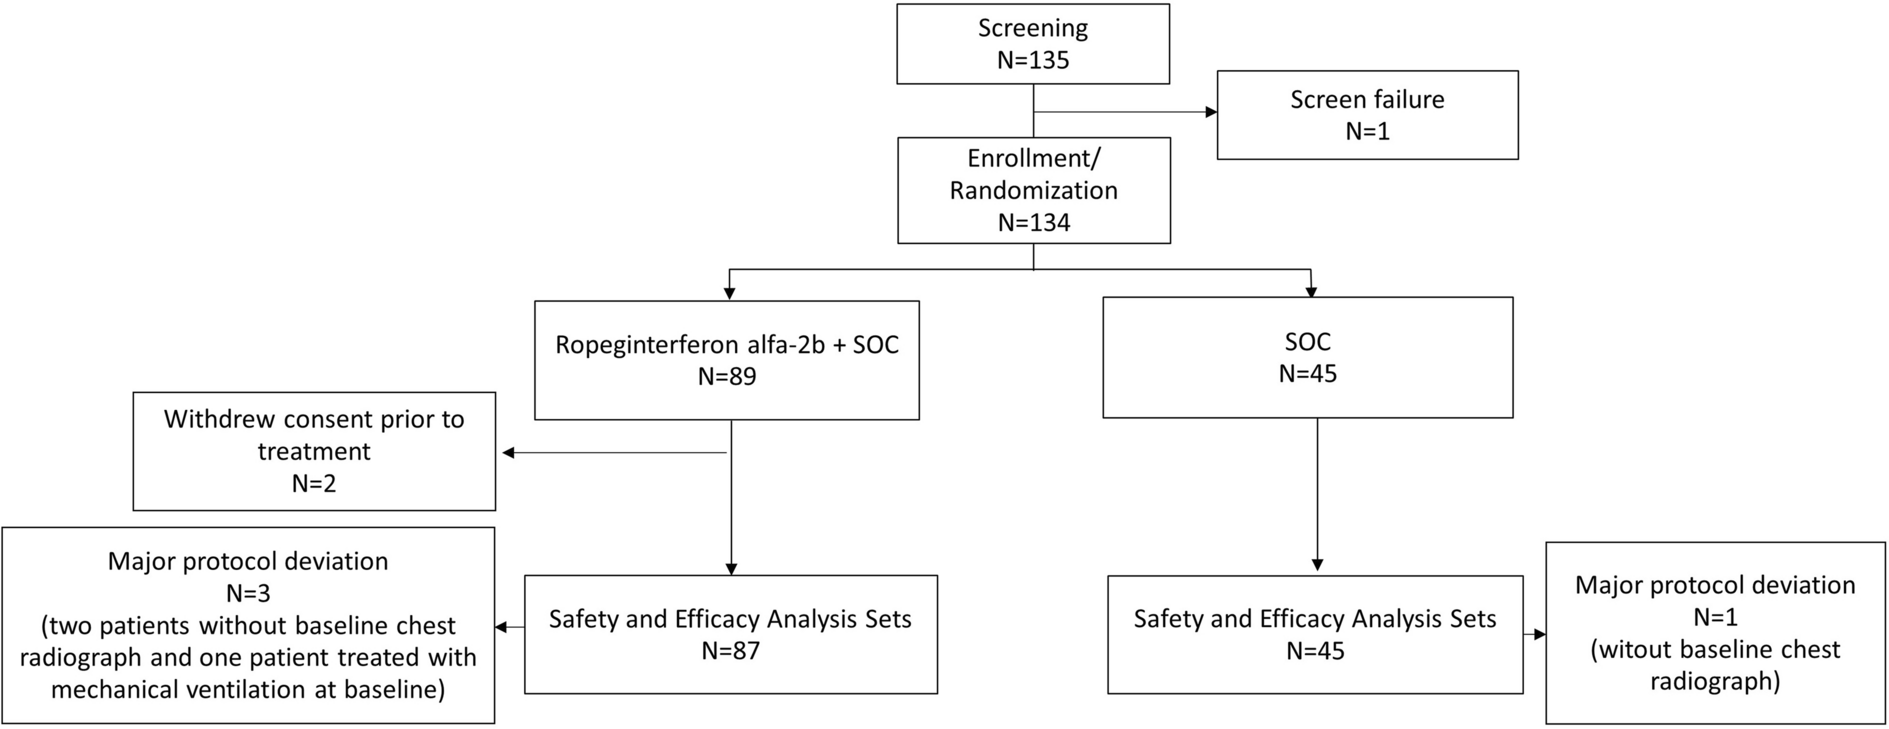 A Phase 3, Randomized, Controlled Trial Evaluating the Efficacy and Safety of Ropeginterferon Alfa-2b in Patients with Moderate COVID-19